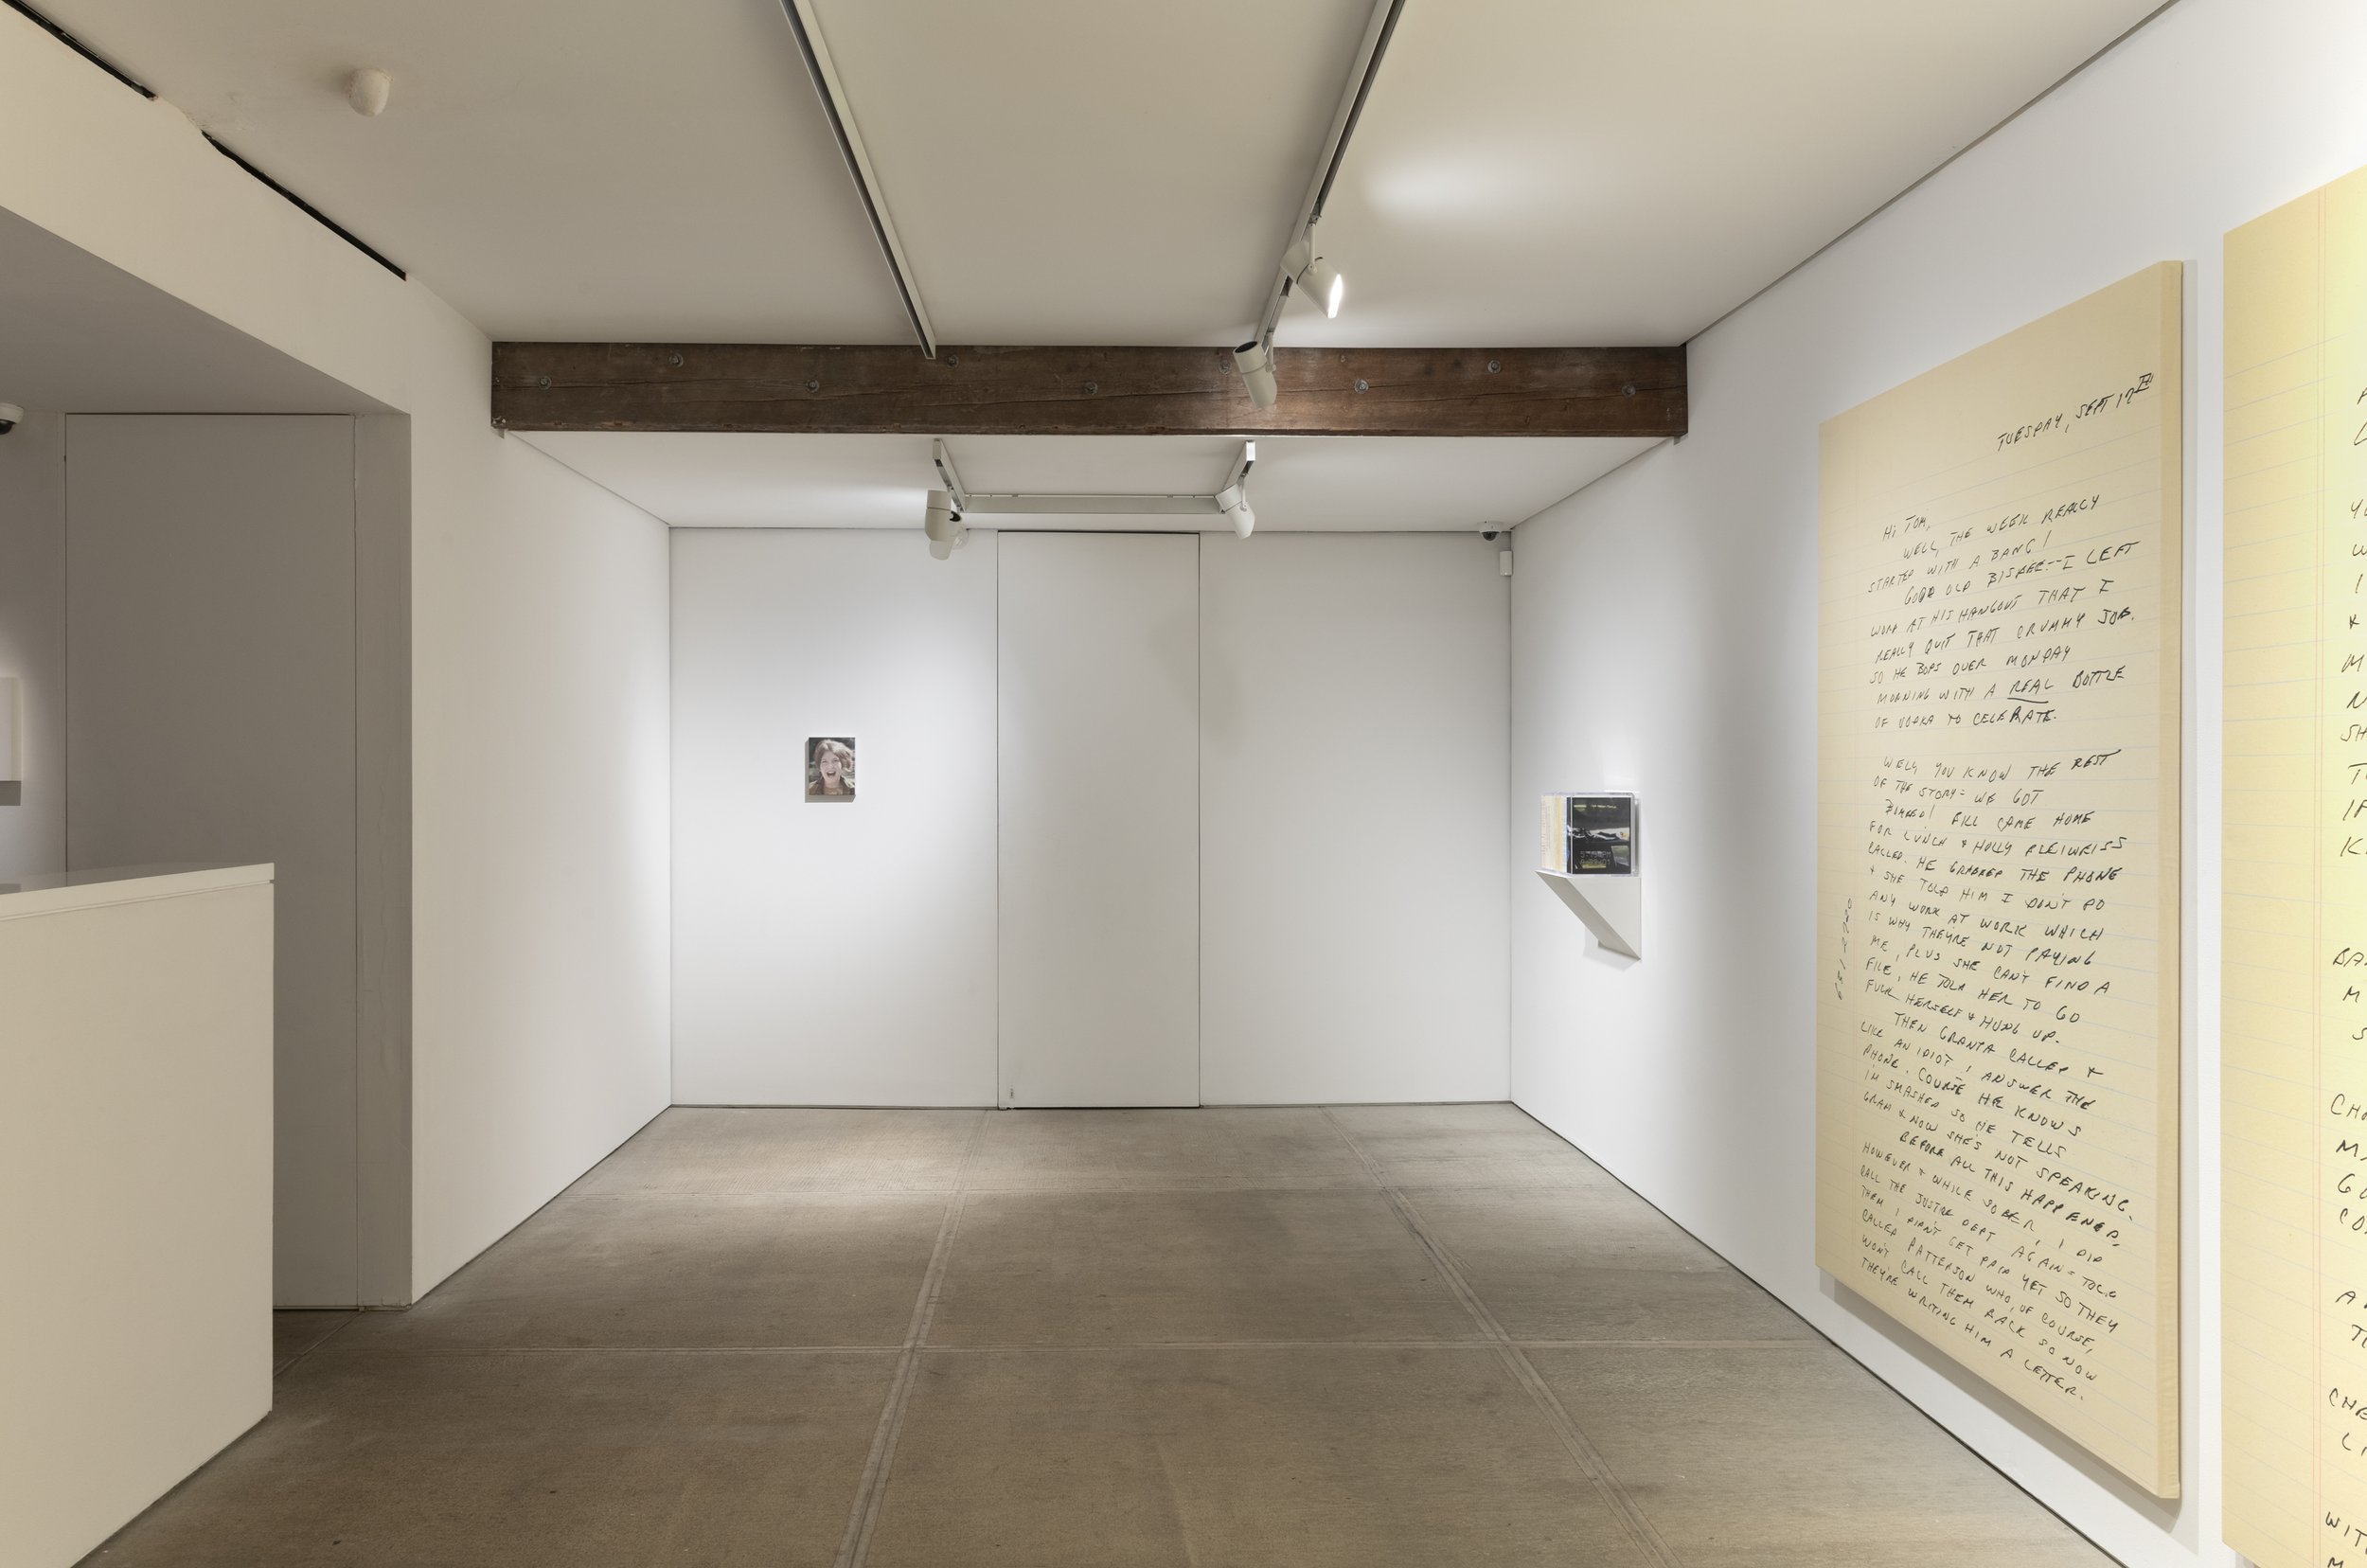 TOTAH_TRE-Letters from Home Installation View 1.jpg